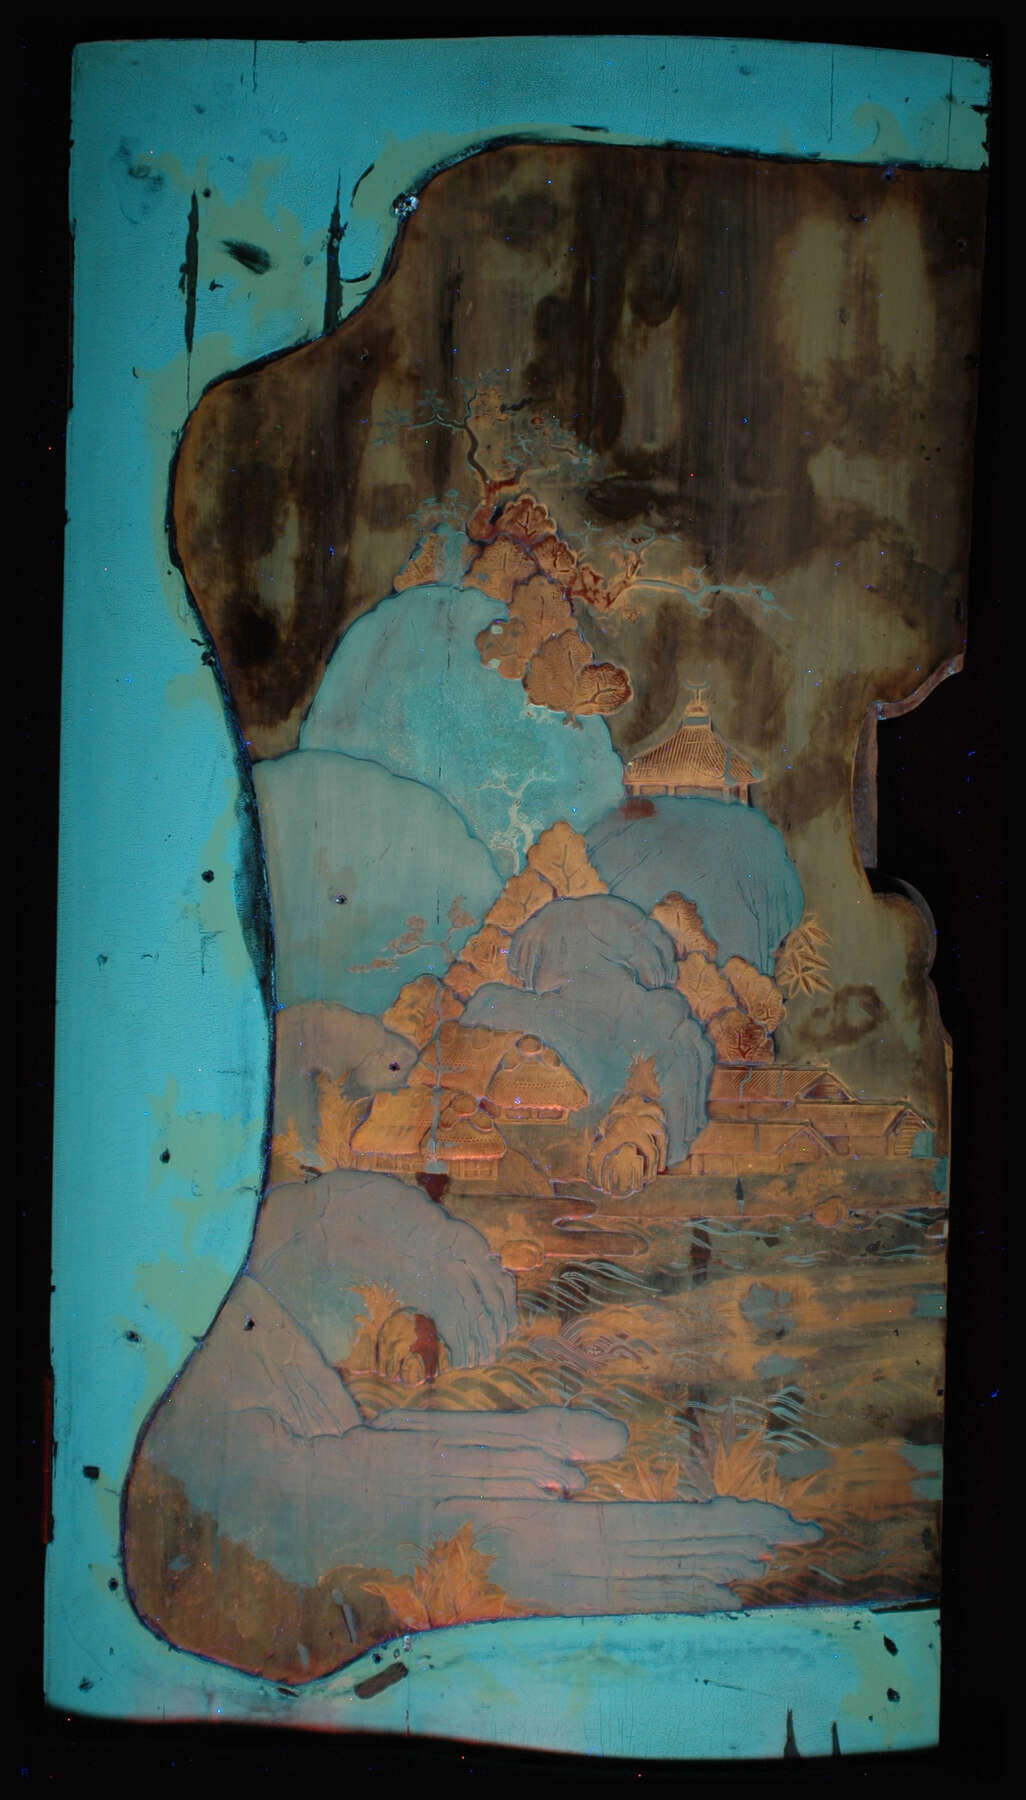 left door of one of the cabinets under ultraviolet light, which reveals the various shades of turquoise, copper, and brown that are indicative of materials added to the cabinet during restoration processes